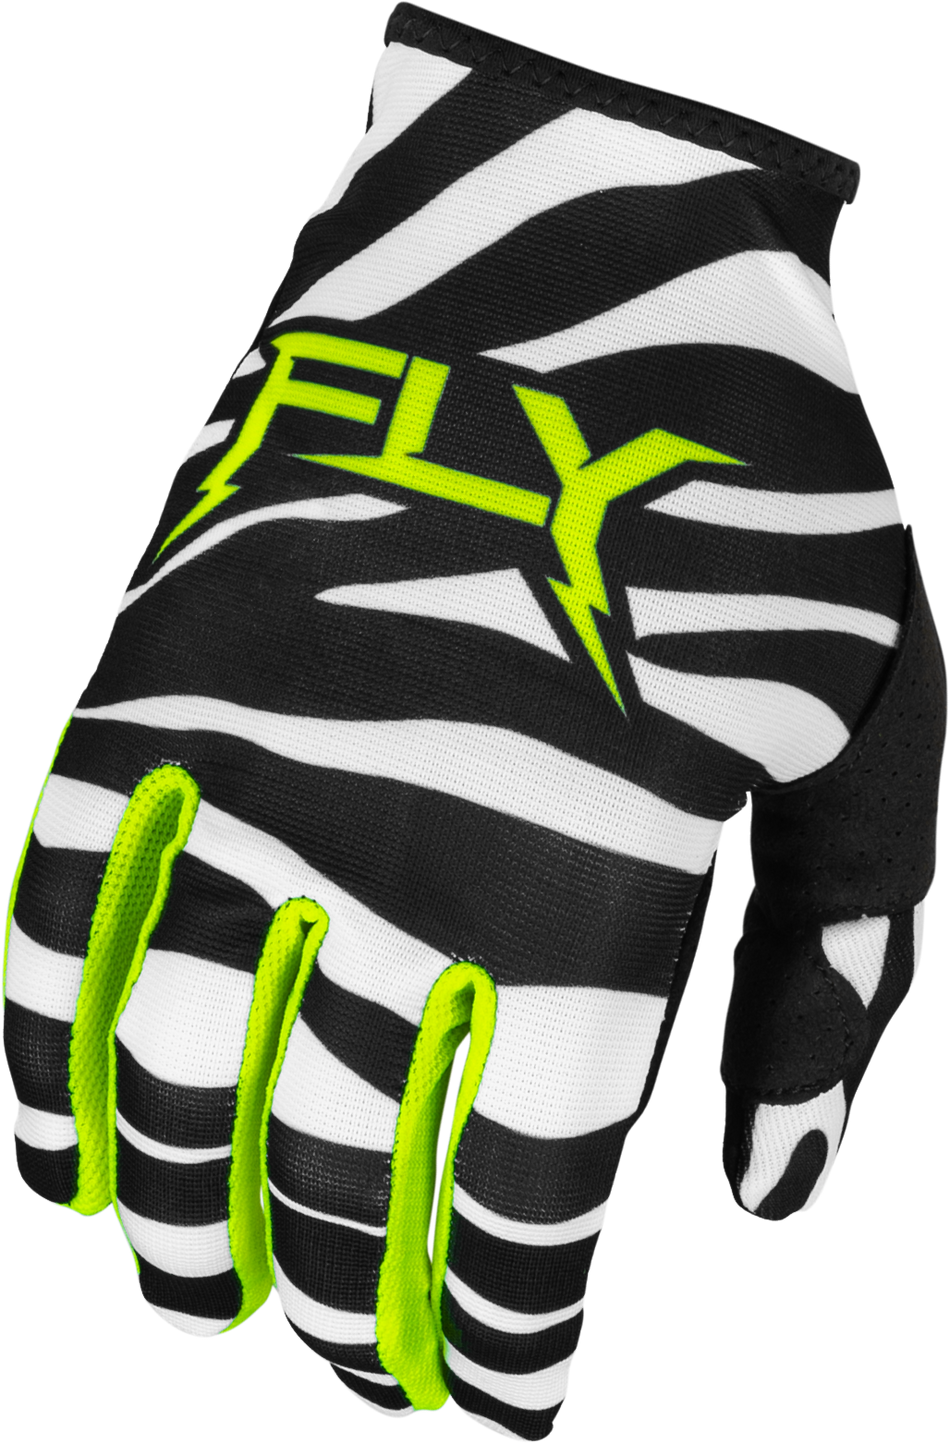 FLY RACING Lite Uncaged Gloves Black/White/Neon Green 3x 377-7423X